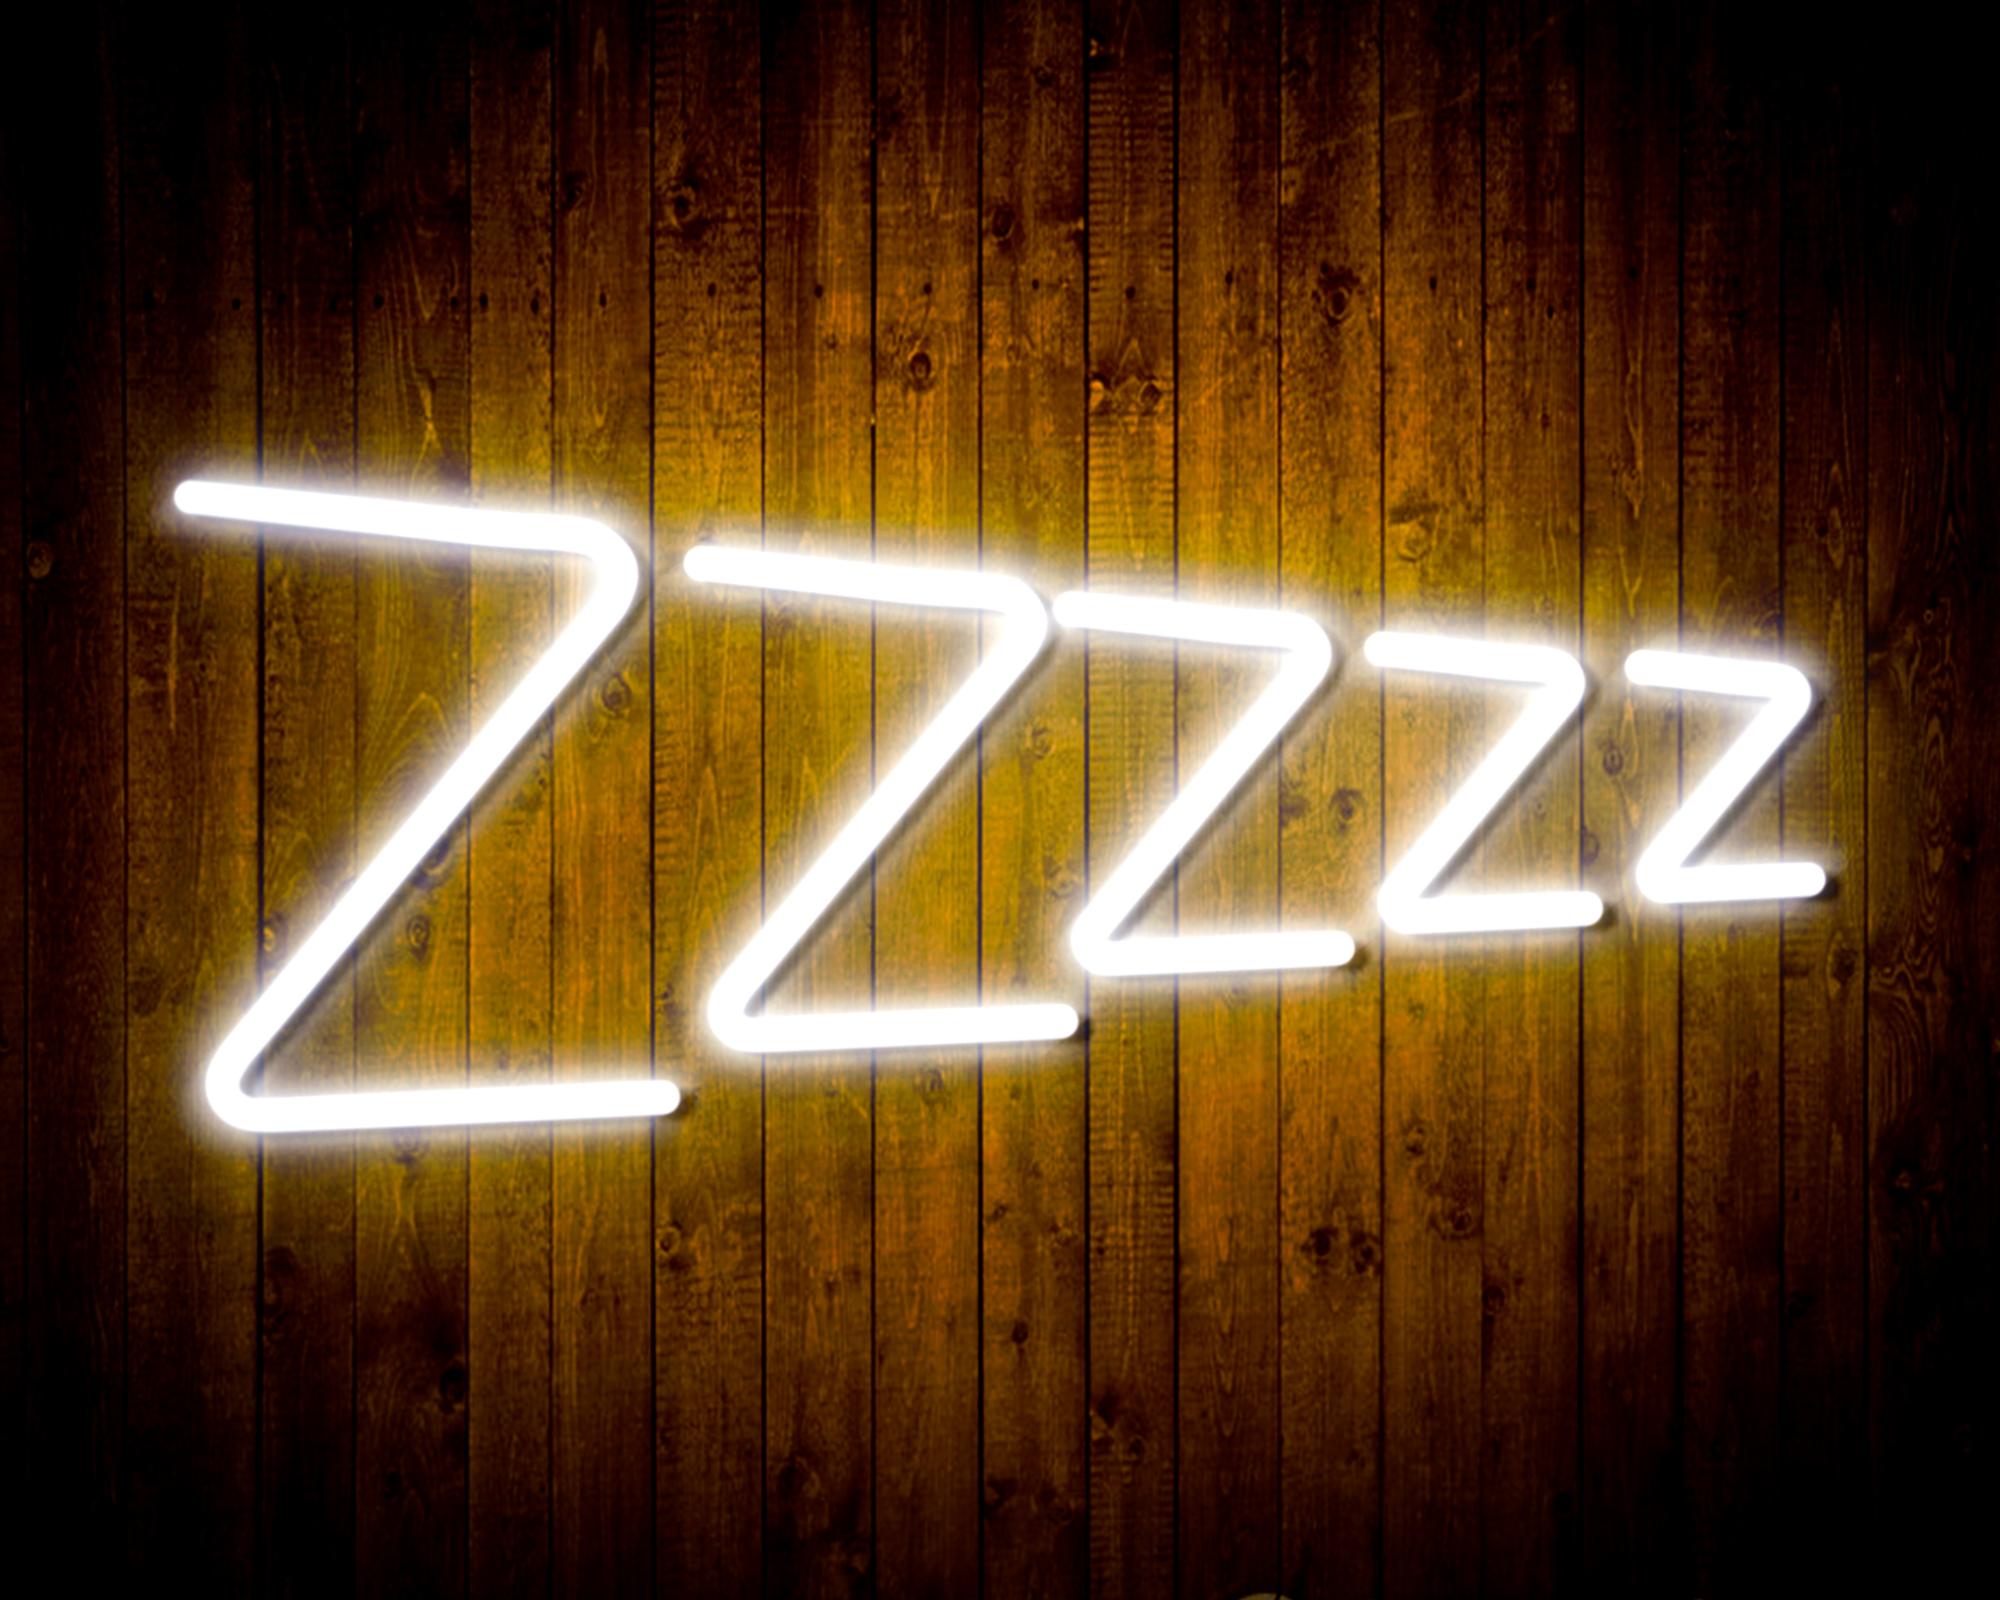 Zzzzz LED Neon Sign Wall Light